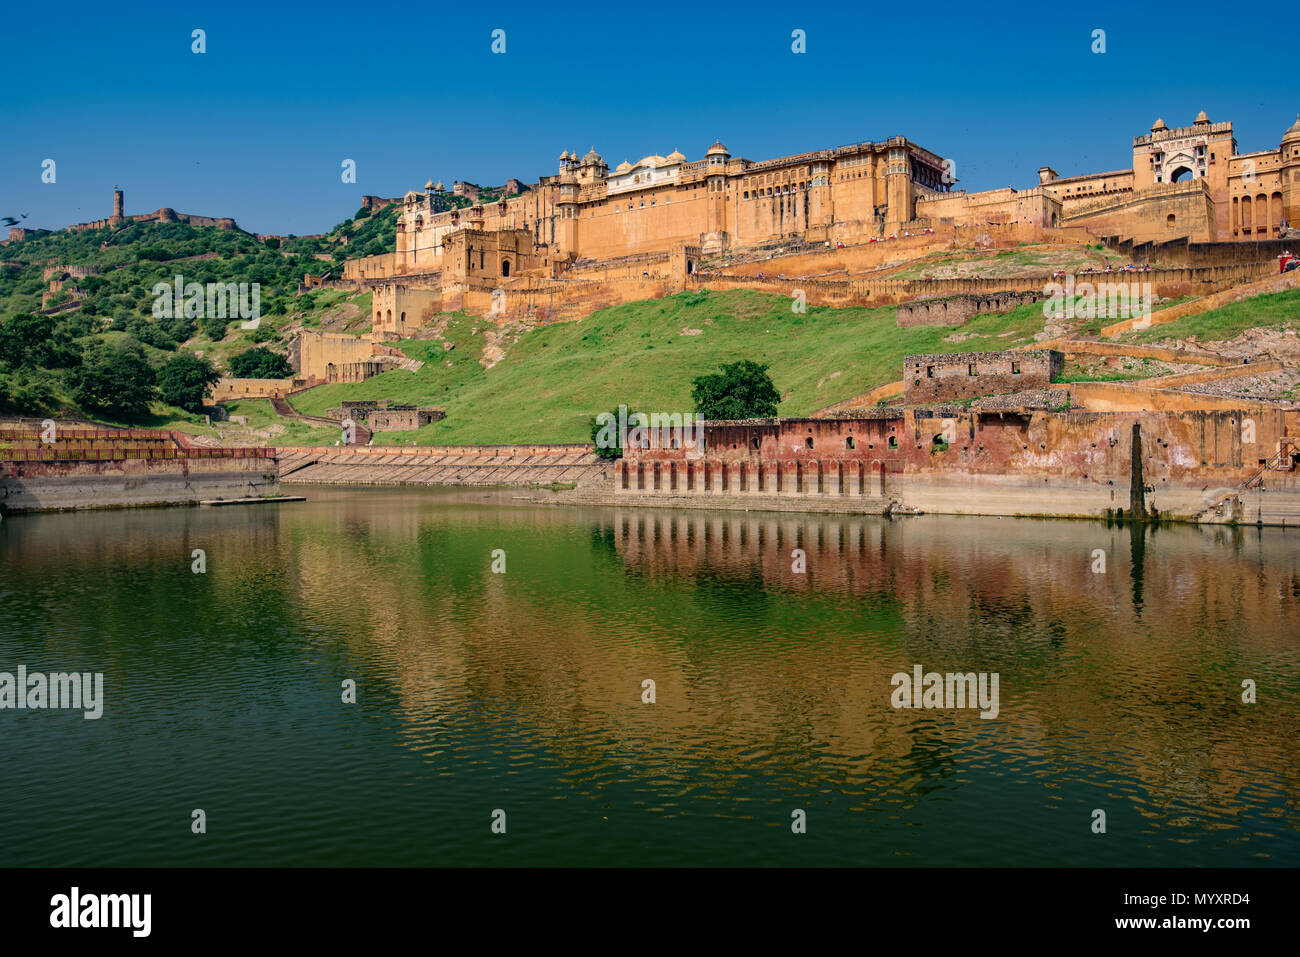 Amer Fort with reflection on water, Jaipur, India Stock Photo